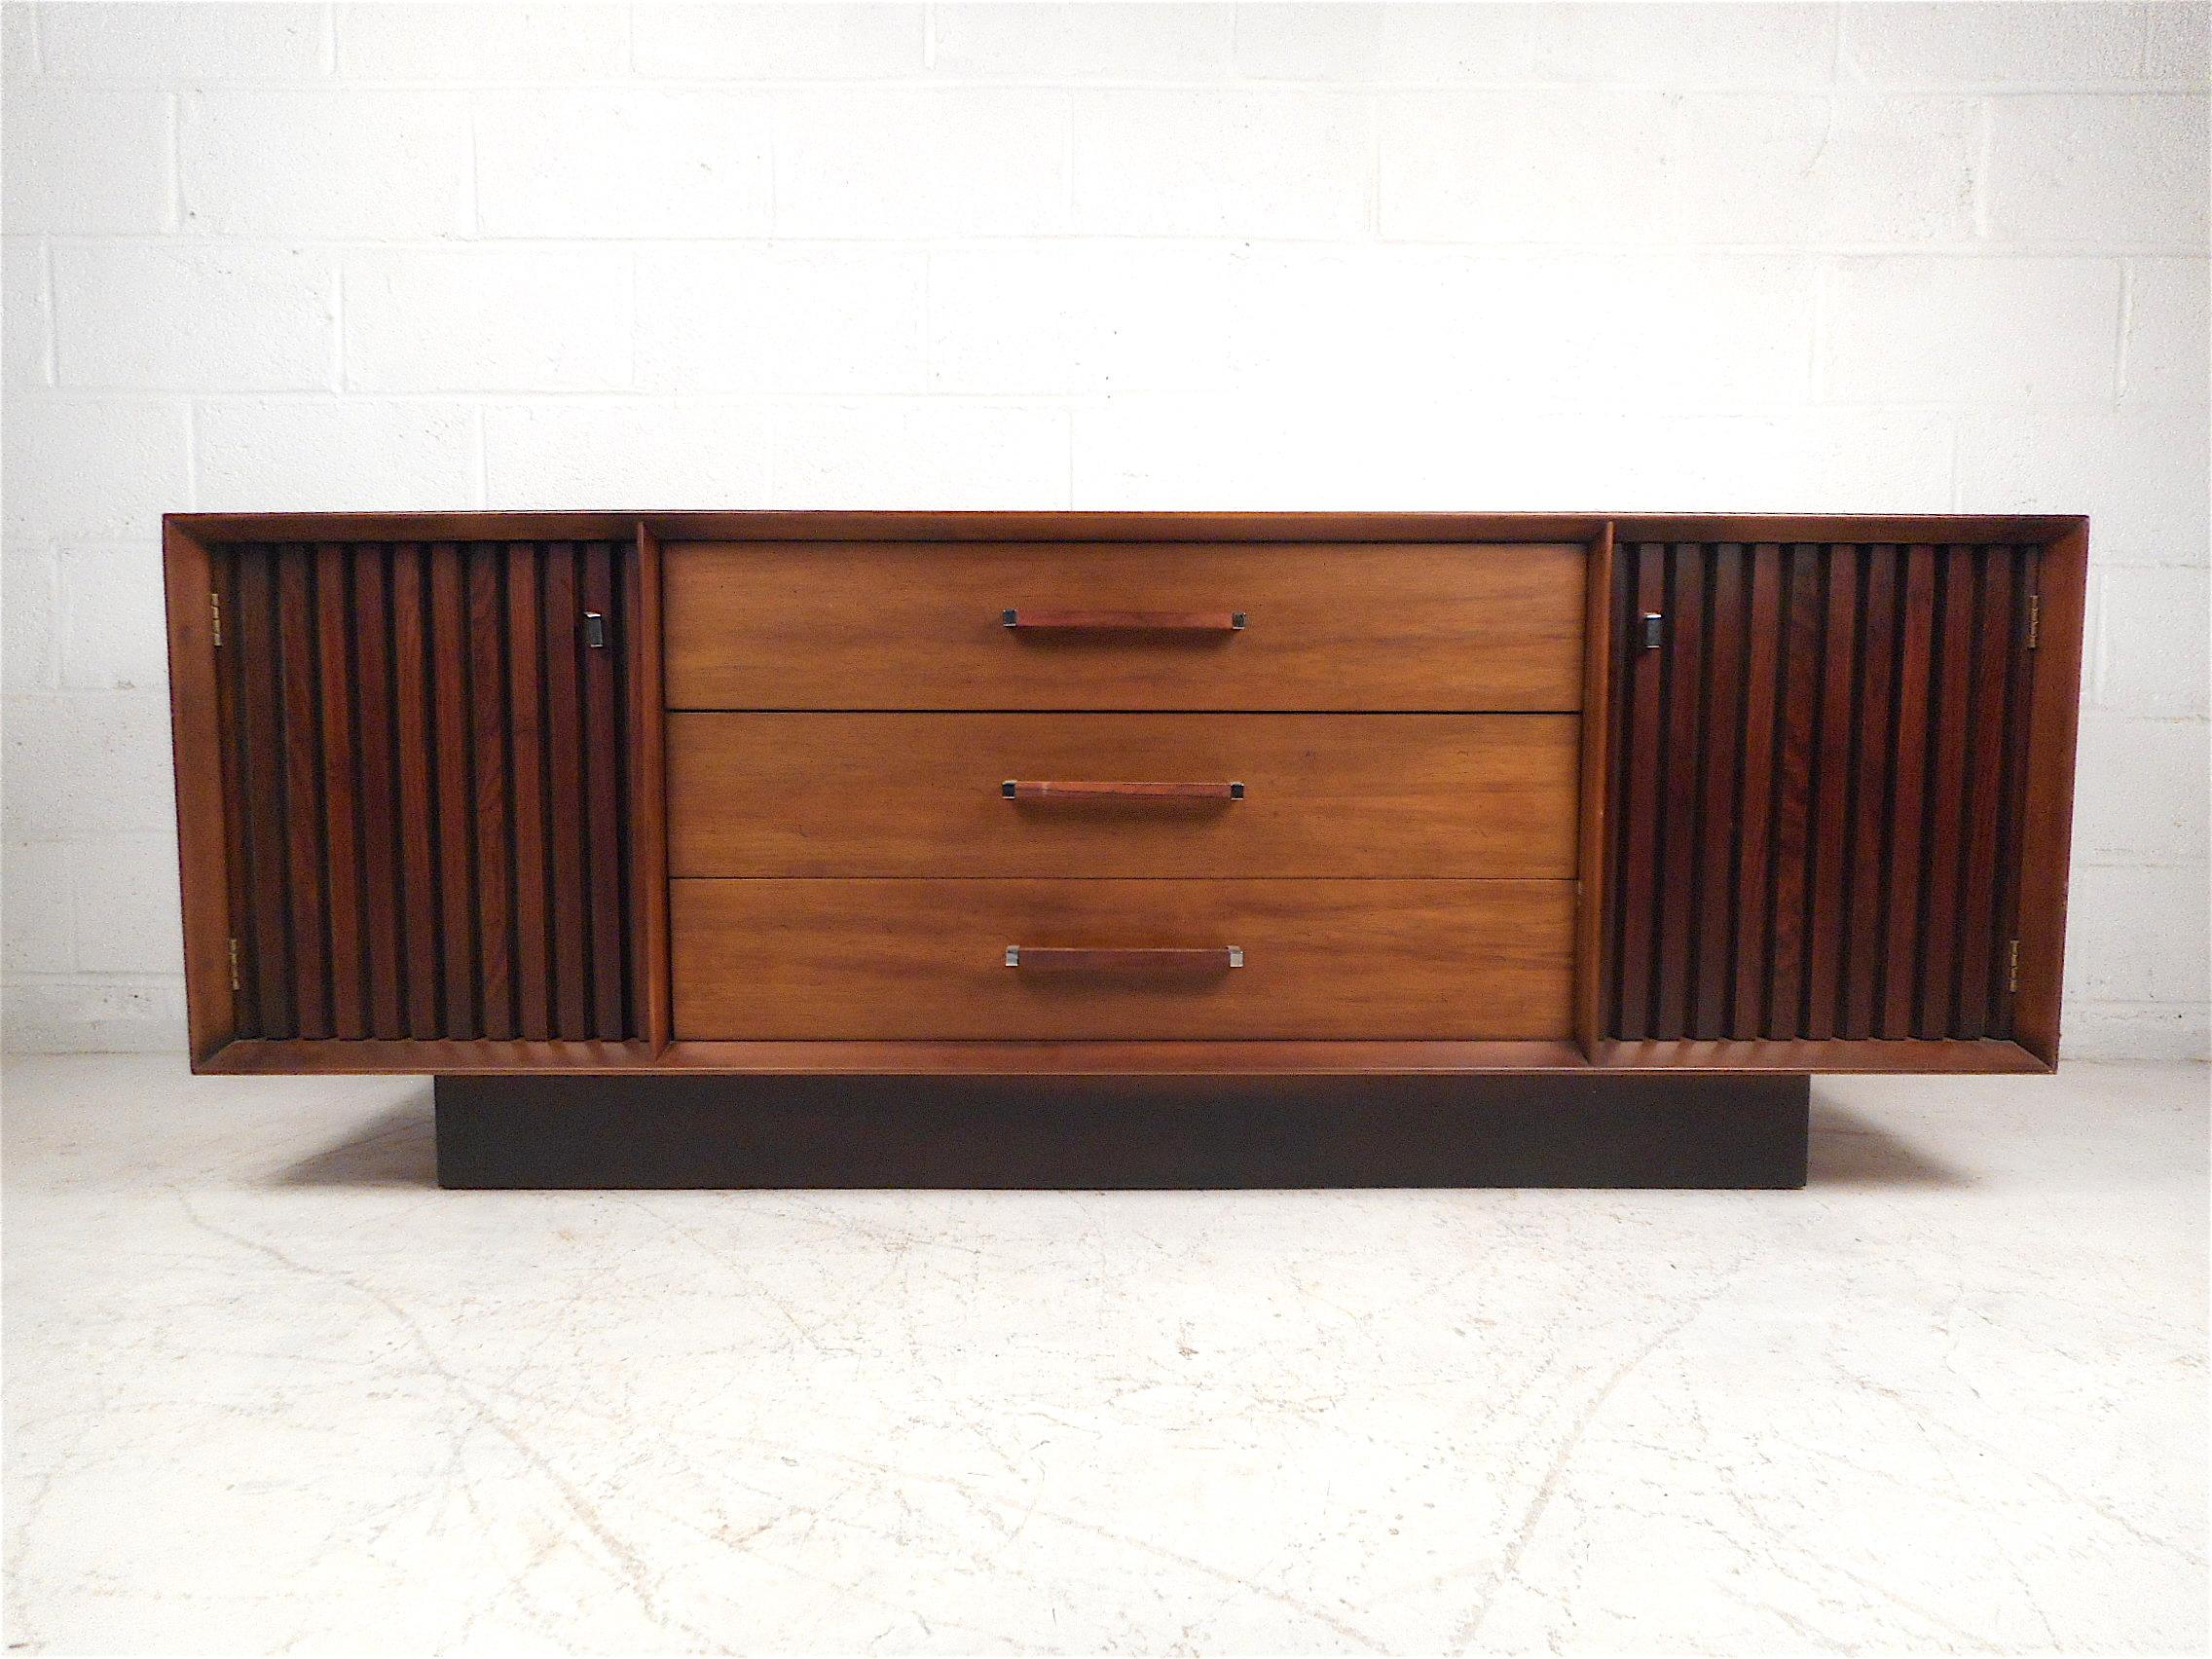 Impressive set of midcentury bedroom furniture including a long dresser and two nightstands, made by Lane Furniture Company, circa 1963. Dresser has three spacious drawers (the uppermost of which is partitioned) flanked by two storage cabinets. All